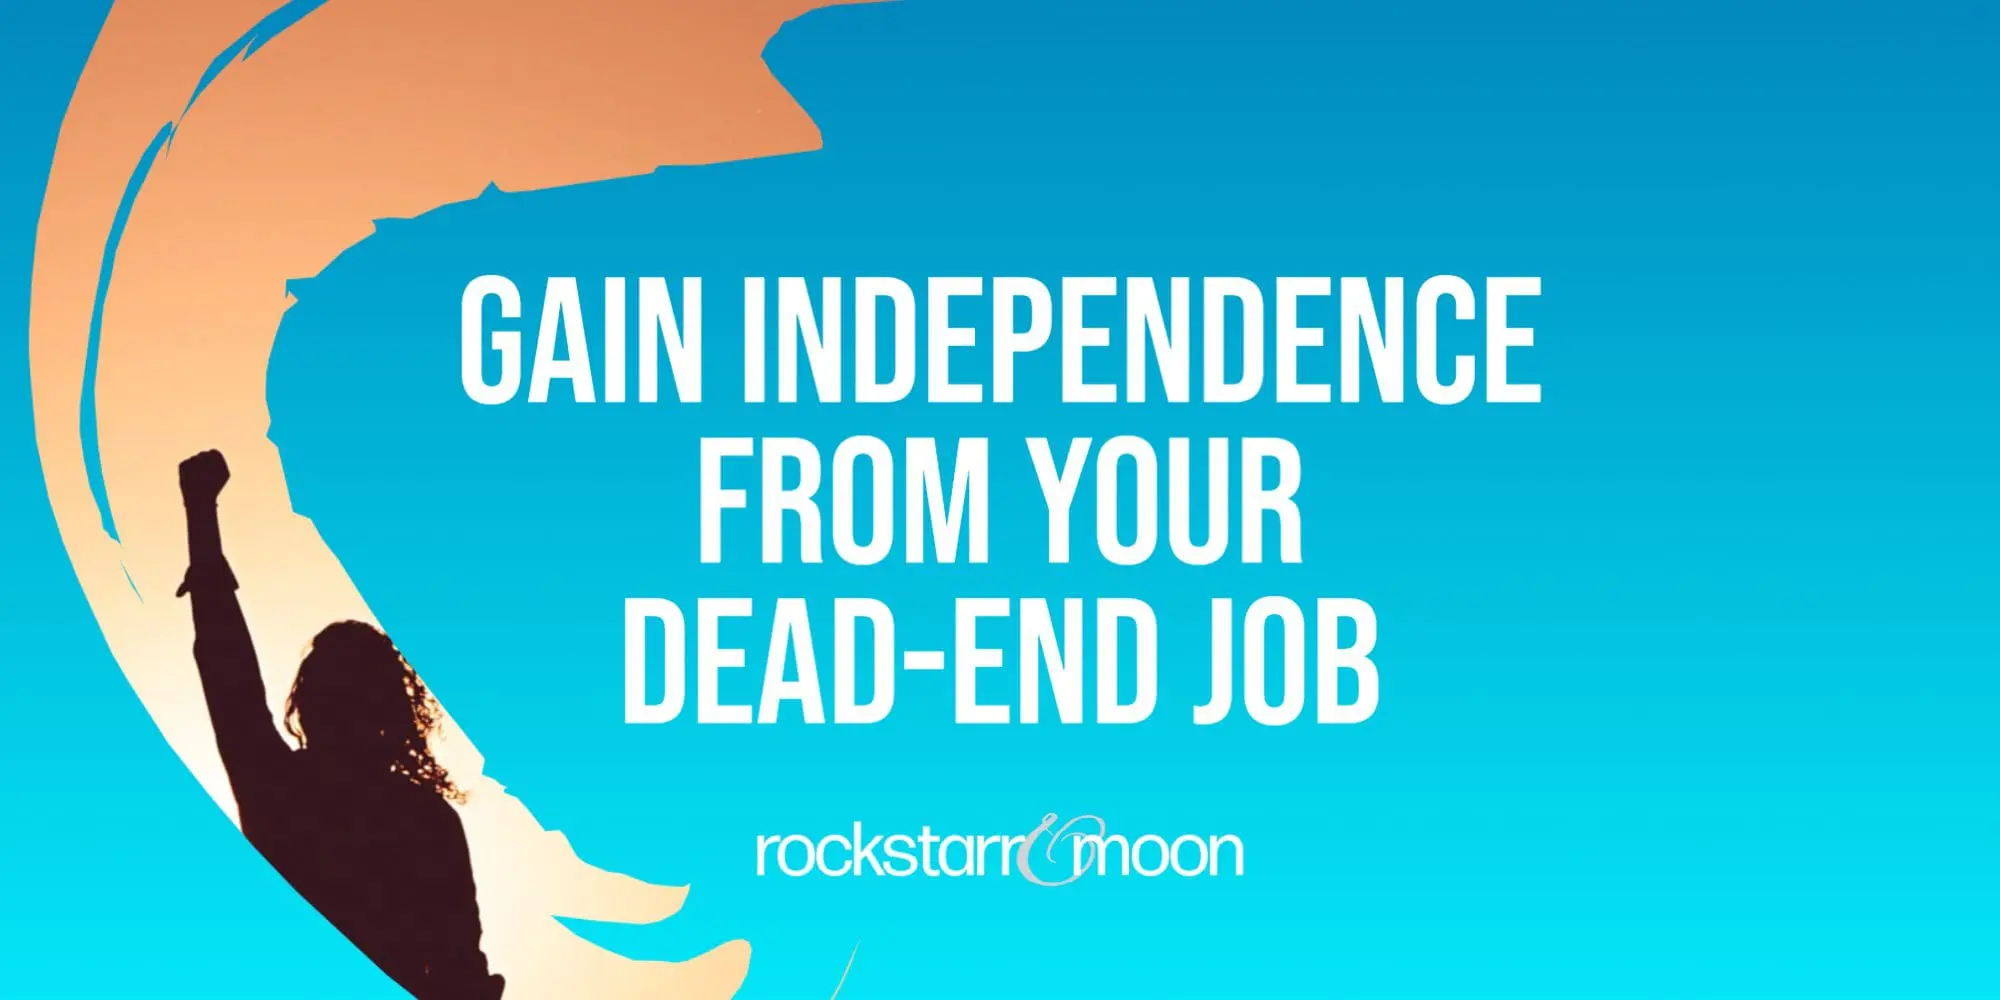 Gain The Independence You Need From Your Dead-End Job